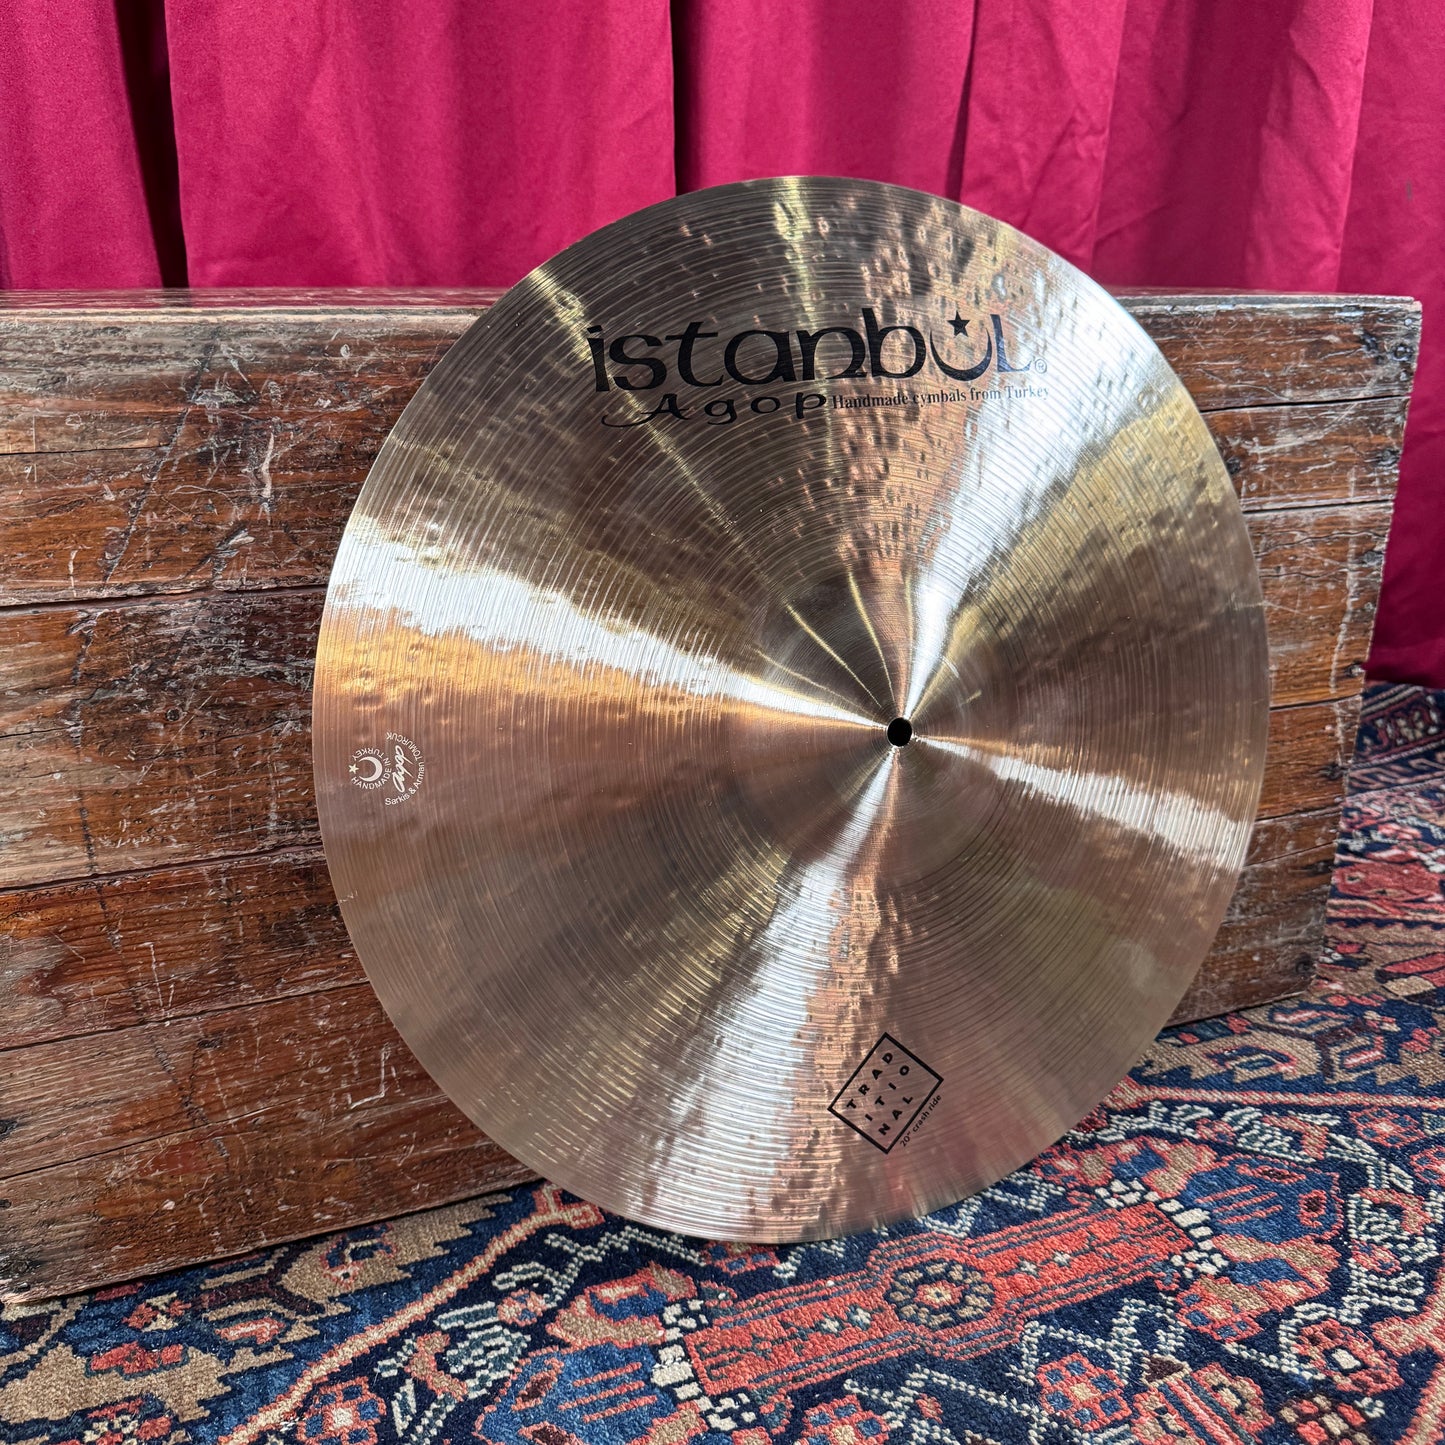 20" Istanbul Agop Traditional Crash Ride Cymbal 1734g *Video Demo*